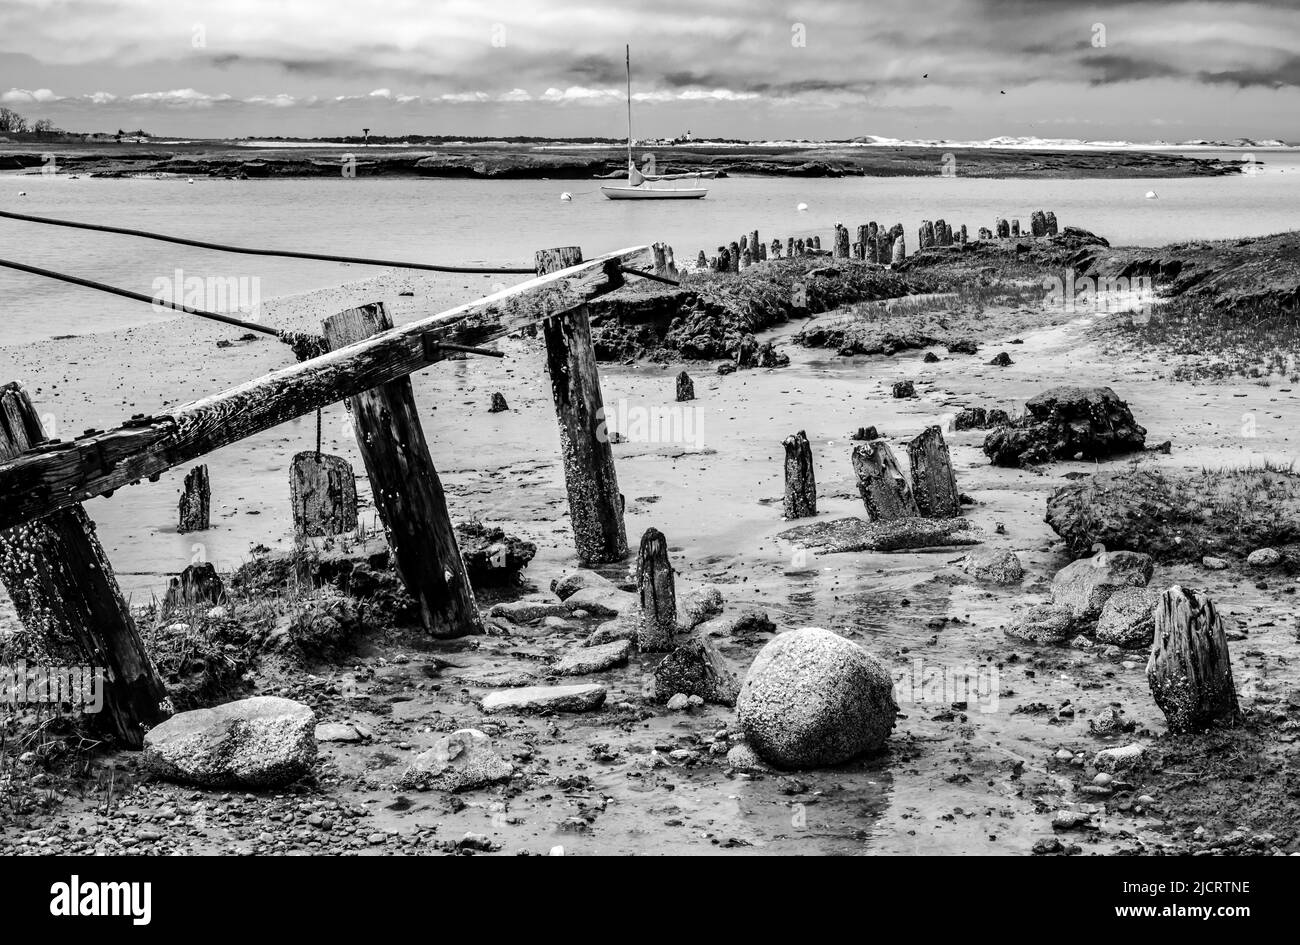 What is left of this very old wharf, and an old round ballast stone shows what is a reminder of all the old ships that use to come in here. Stock Photo